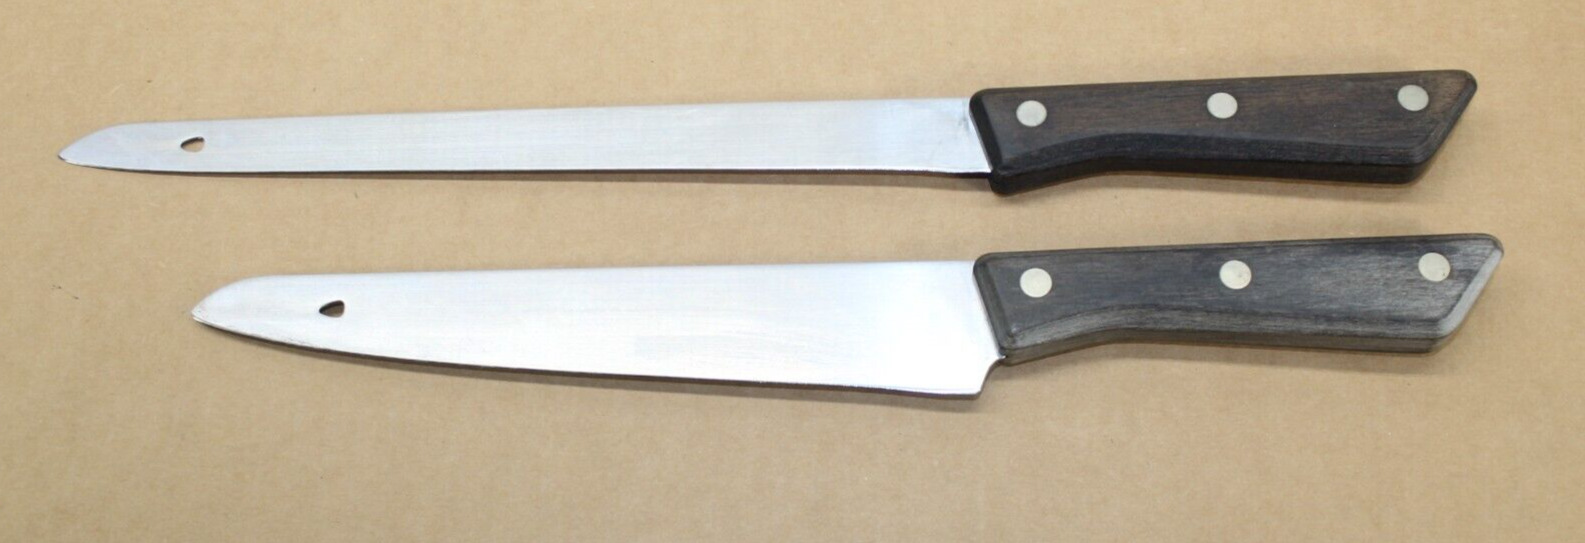 Pair of VINTAGE 1970s MIRACLE MAID STAINLESS KNIVES USA. JAPANESE STYLE 8\